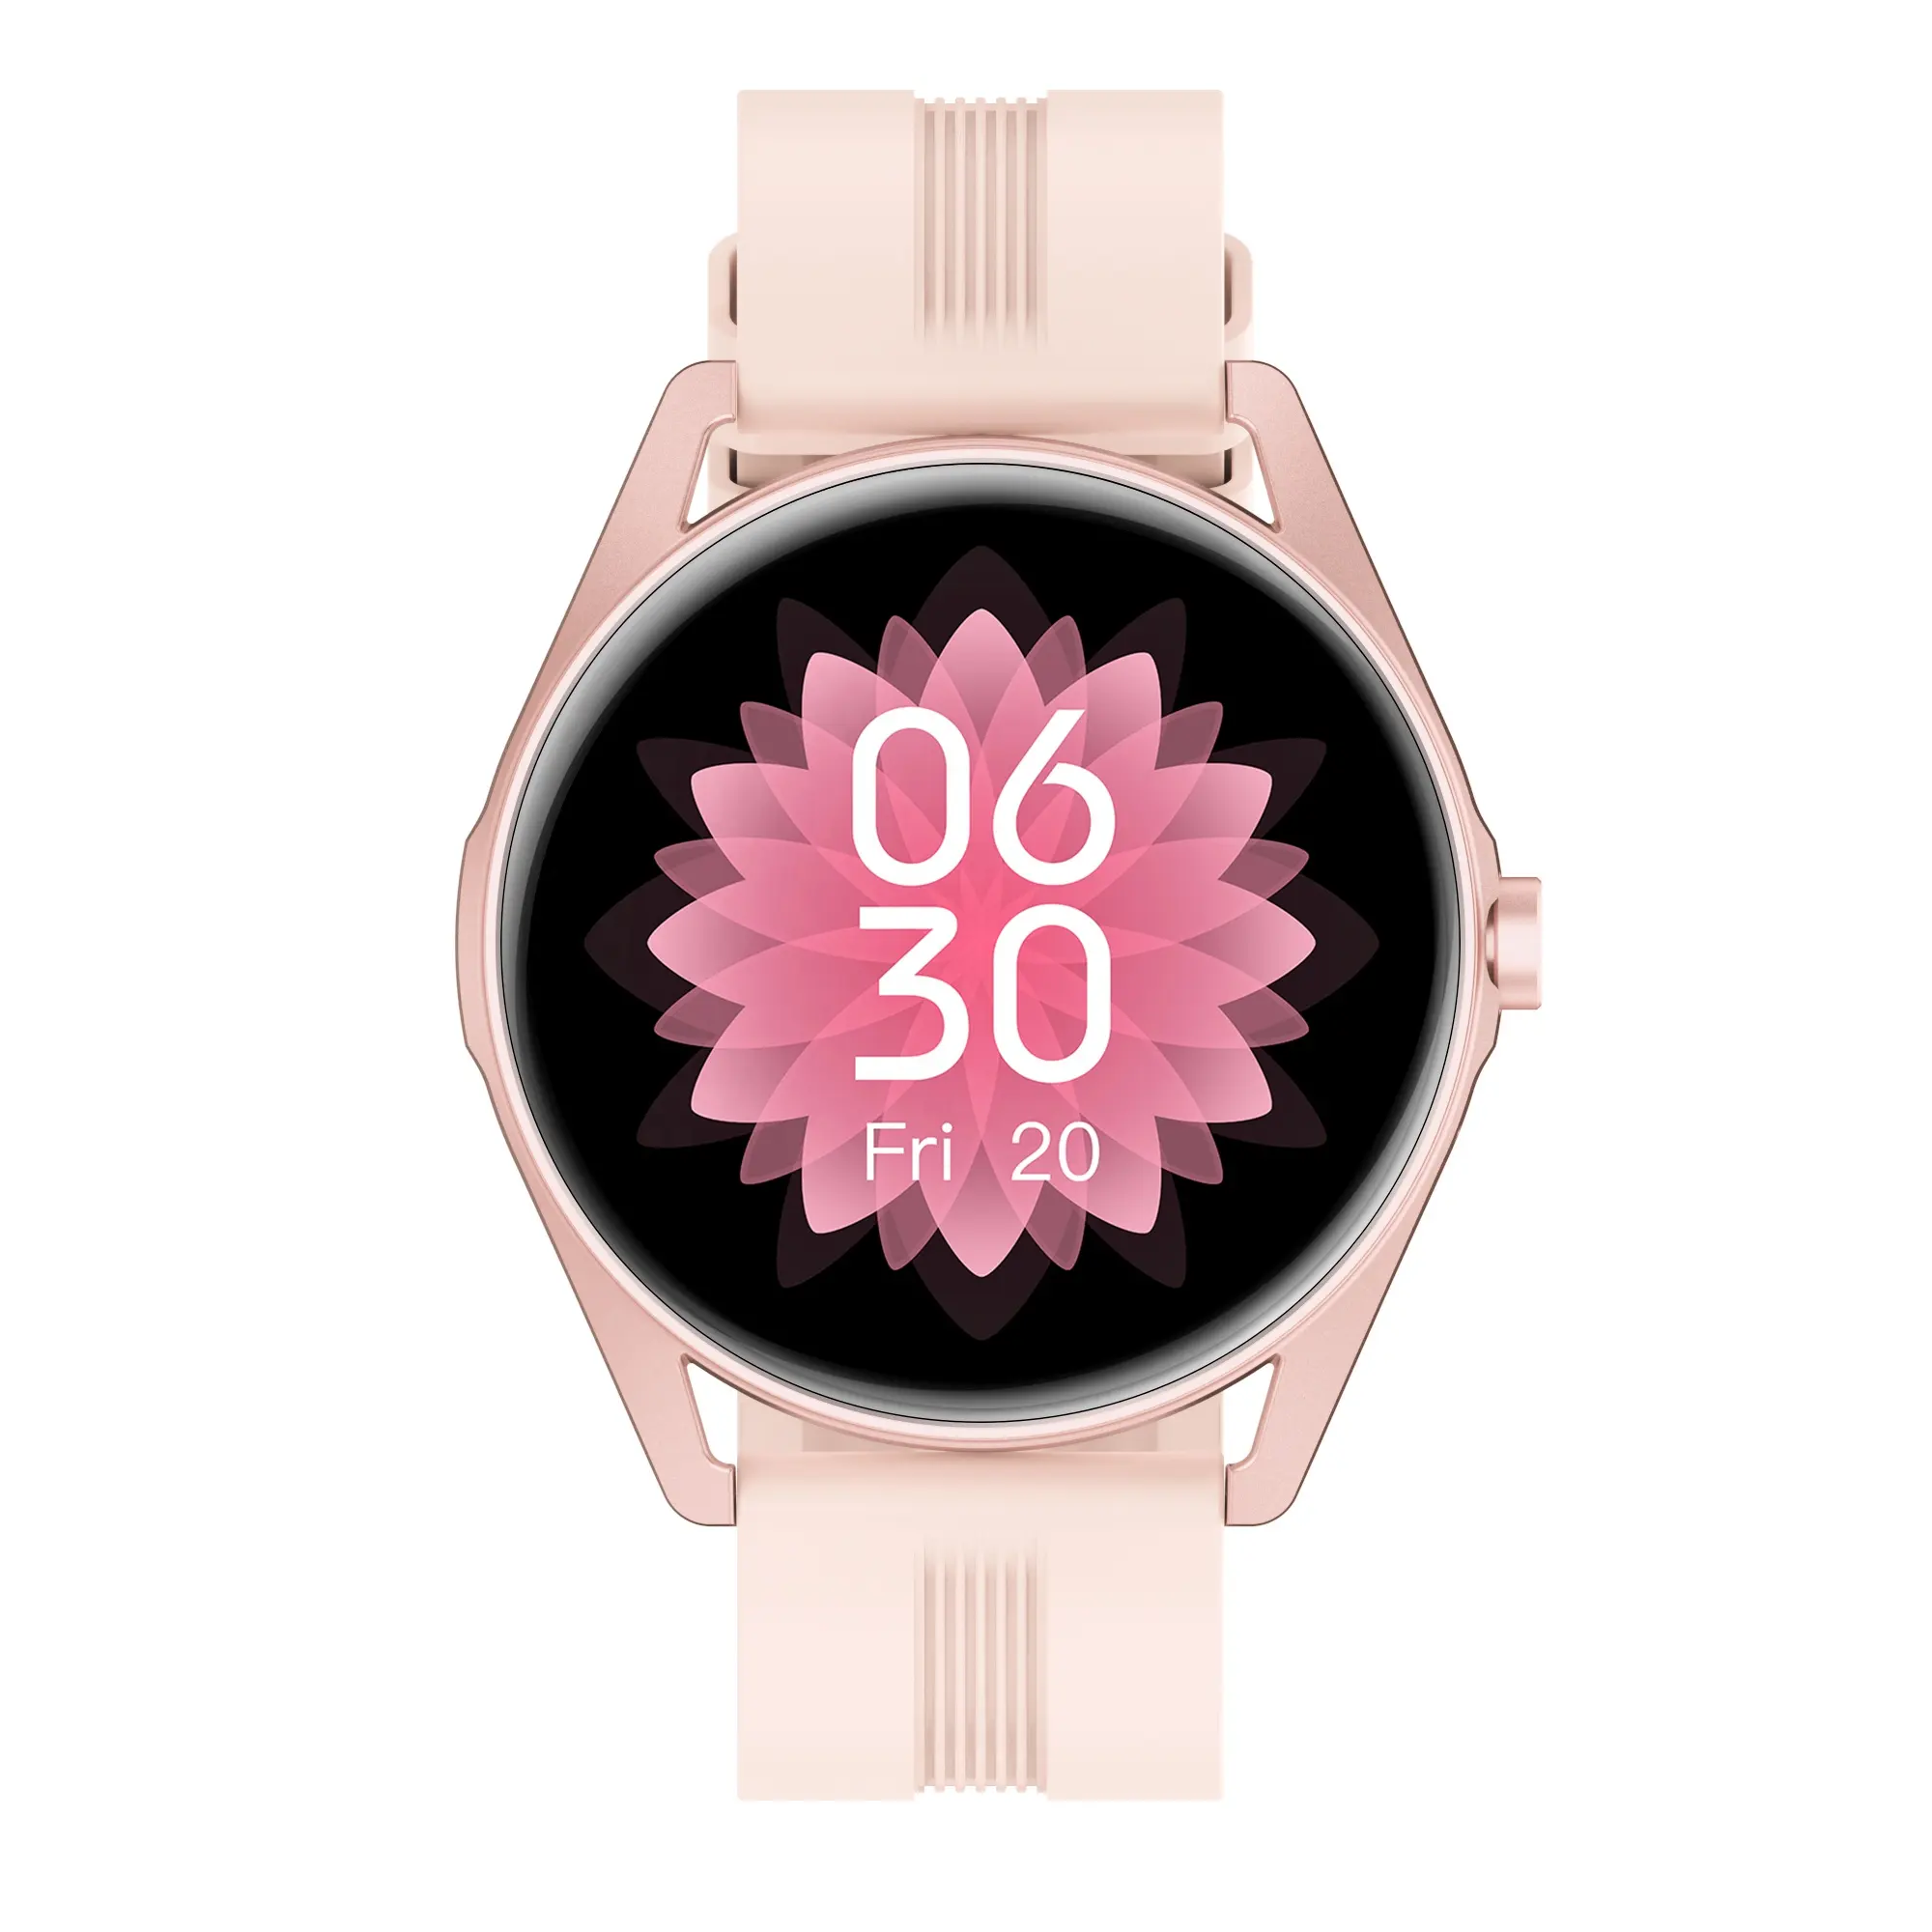 Fashion sport SMART Watch LC308 for Designed specifically for the modern women